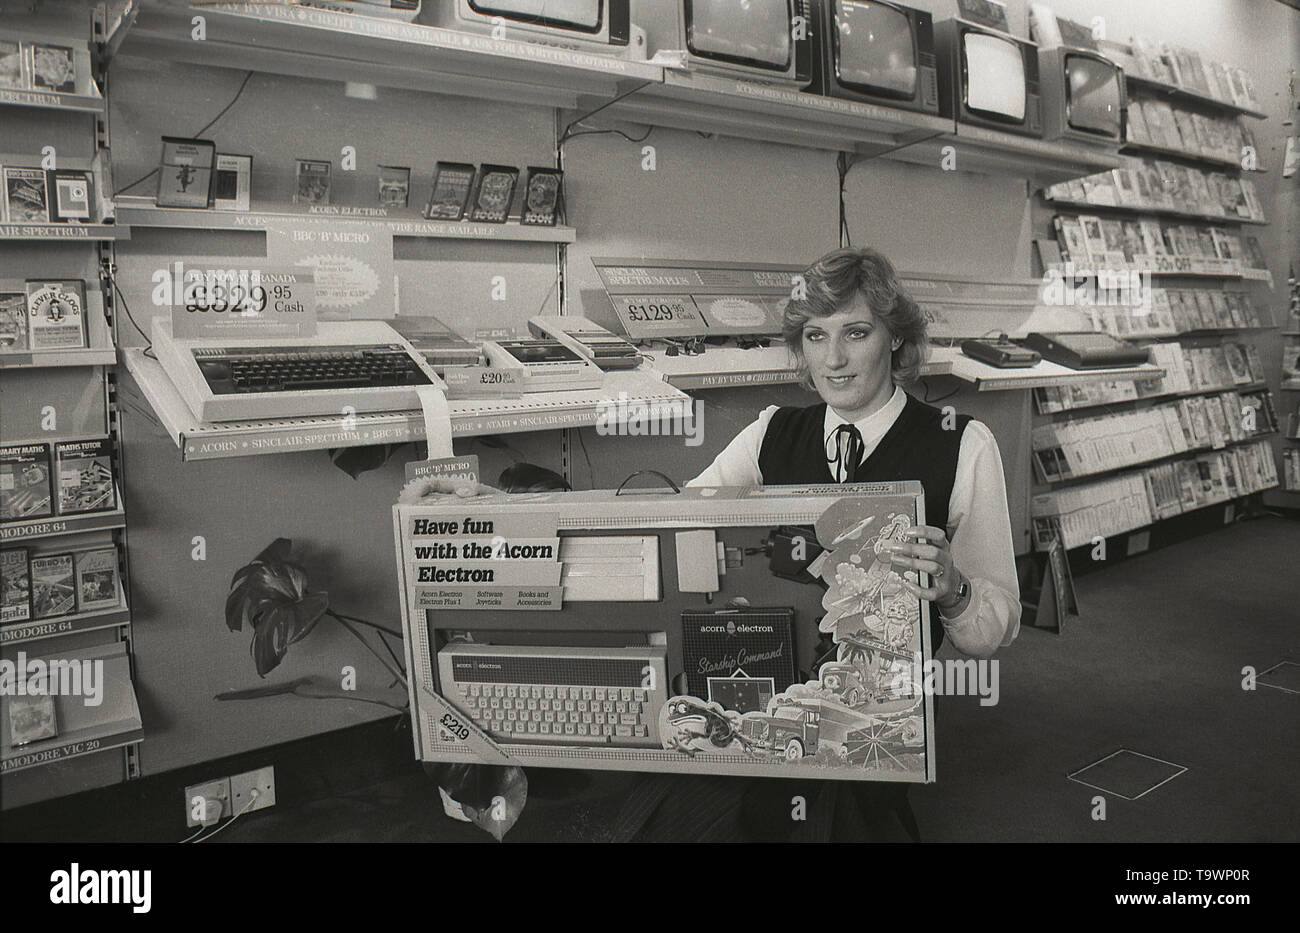 1985, historical, home entertainment equipment inside a Granada TV retail shop, a female shop assistant shows a box containing the new Acorn Electron home computer, England, UK. Stock Photo